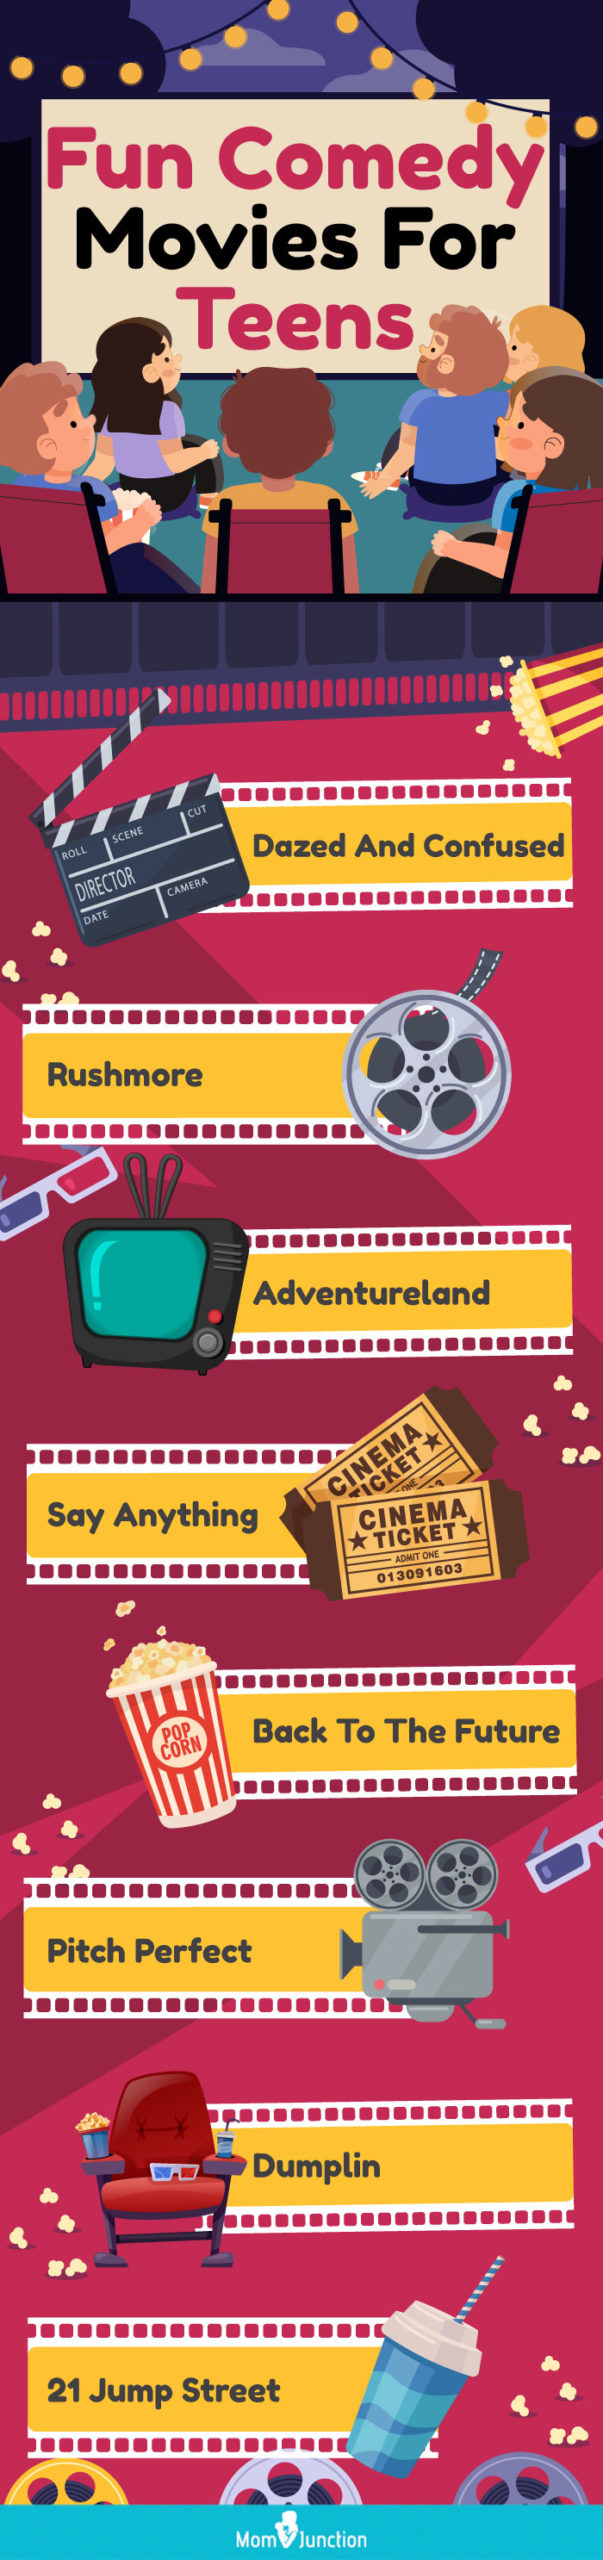 fun comedy movies for teens (infographic)